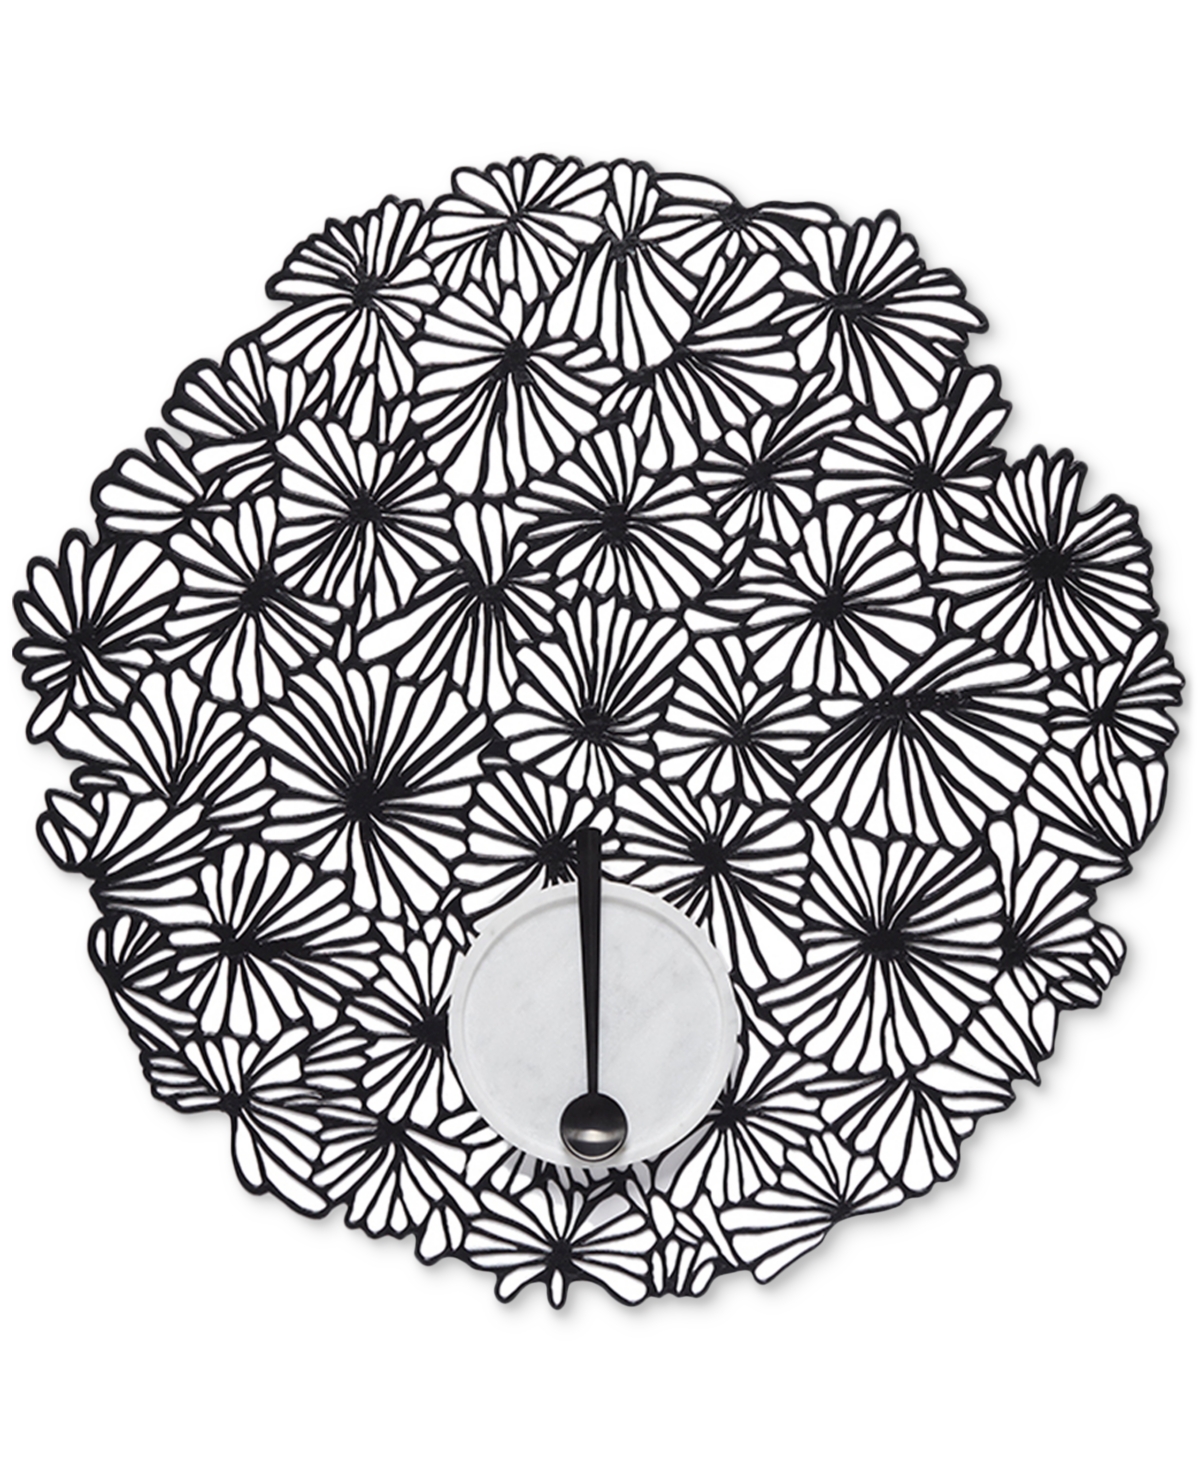 15795771 Chilewich Pressed Daisy Placemat sku 15795771